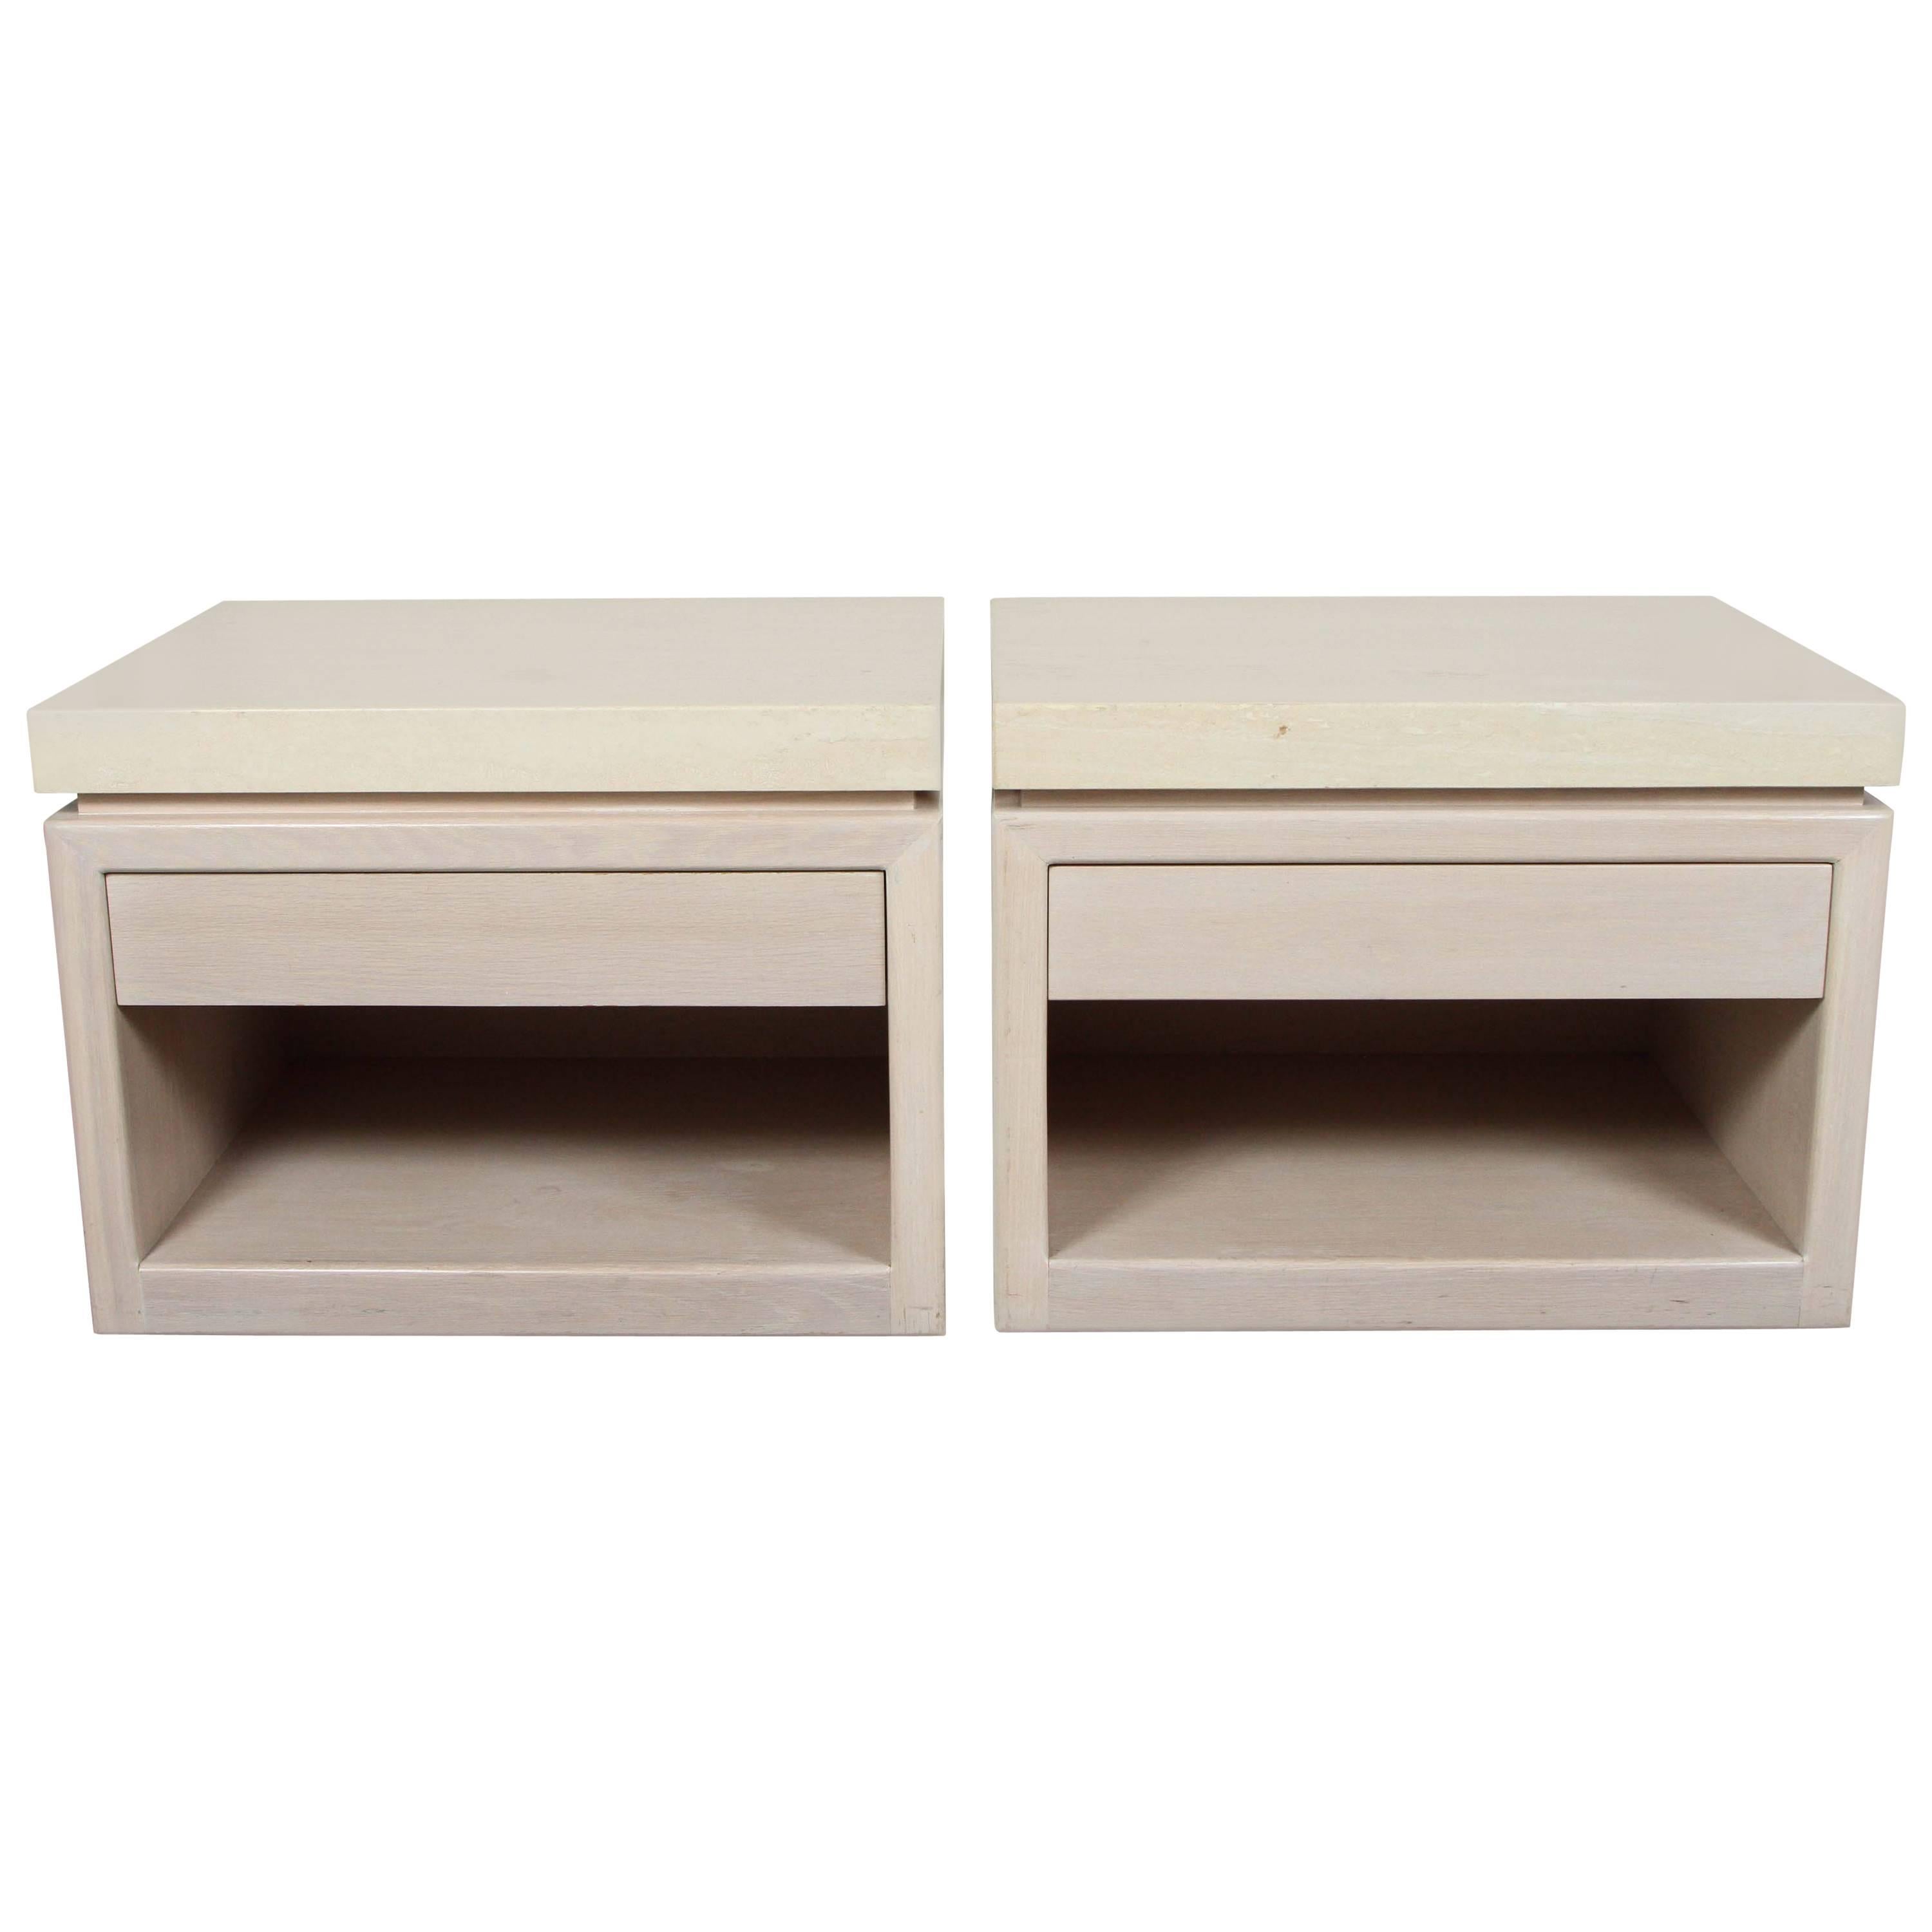 Pair of End Tables with Polished Travertine Tops